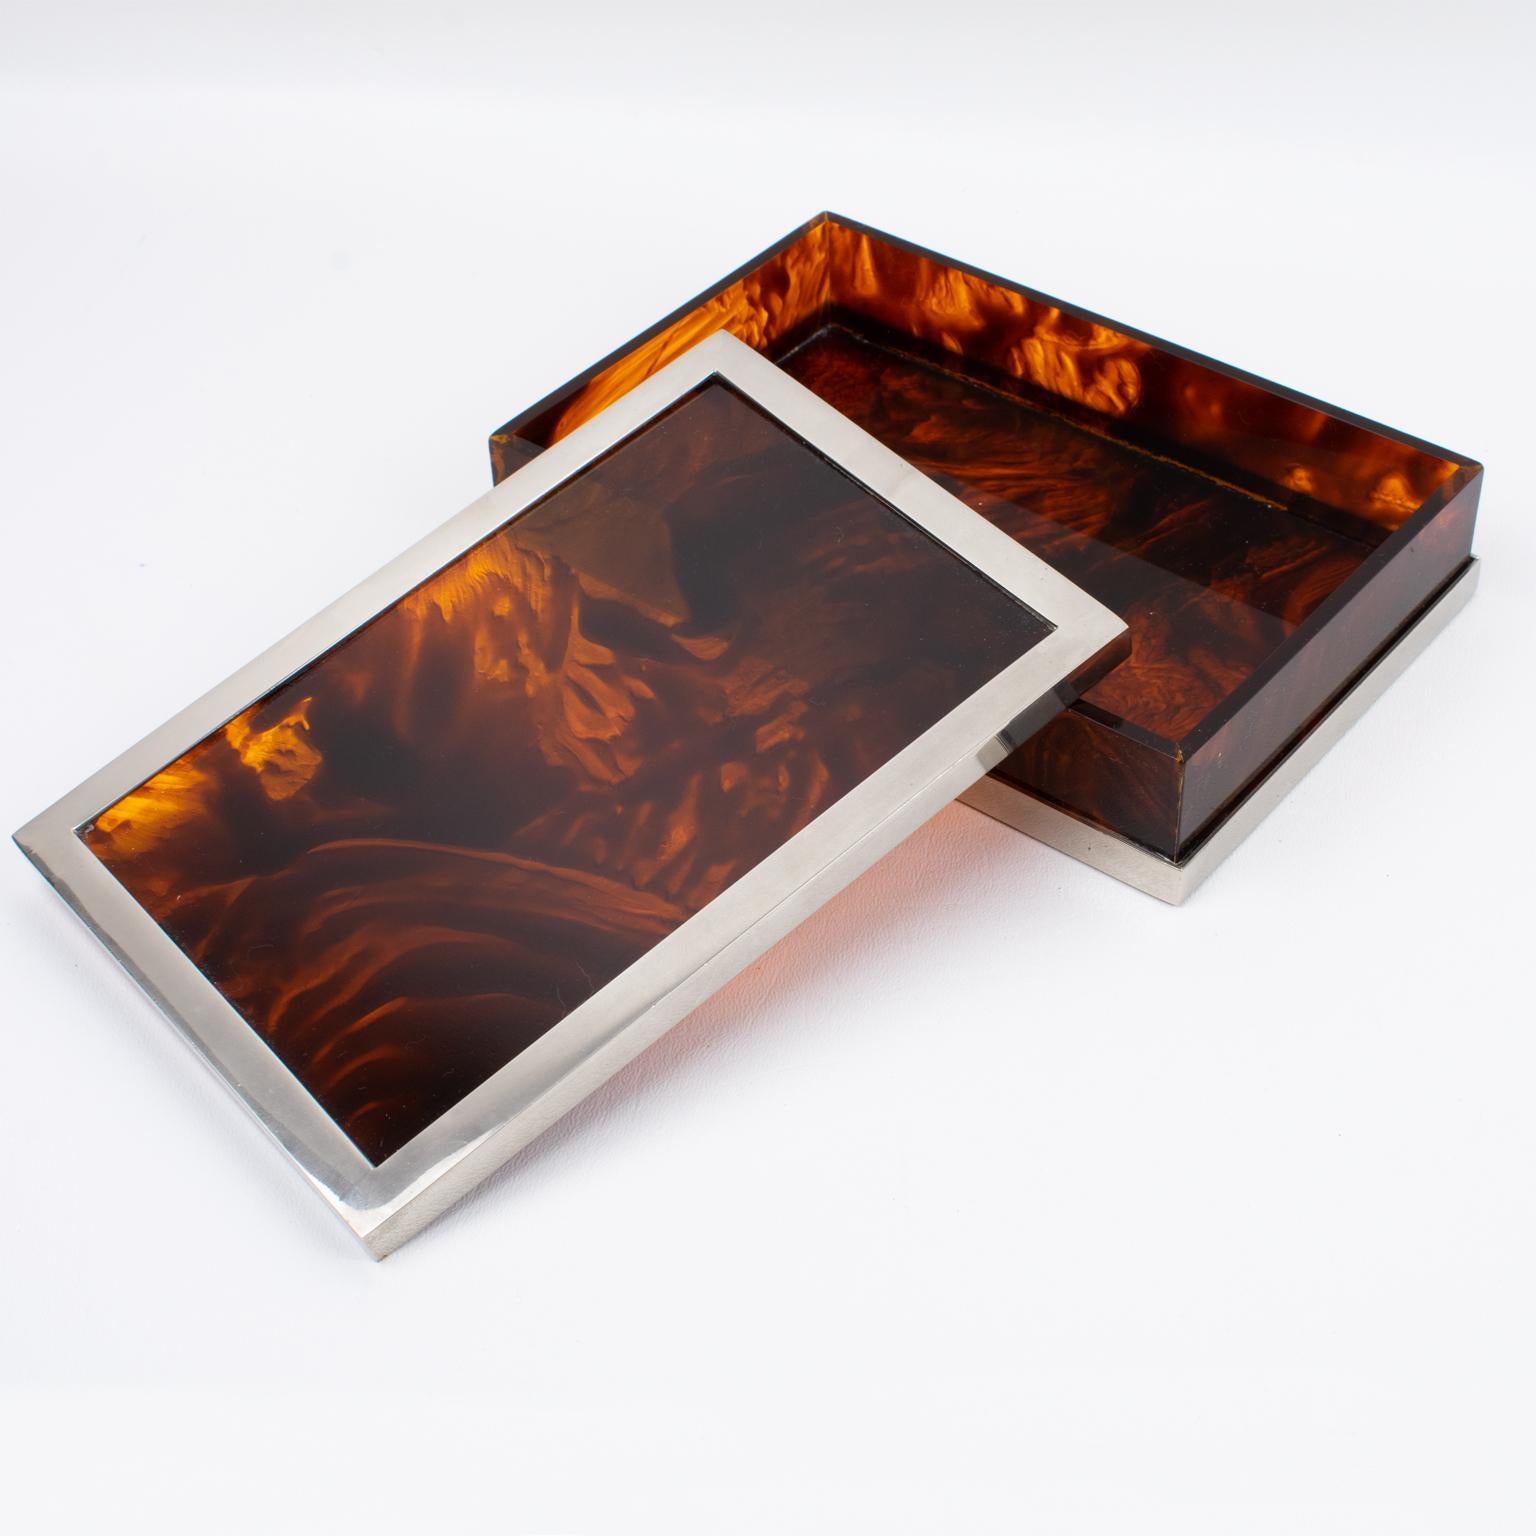 This elegant 1970s rectangular-shaped decorative lidded box was designed by the Parisian luxury house Maison Mercier Freres. It features a thick tortoise (tortoiseshell) pattern Lucite or Plexiglass base and chromed metal framing, which gives it a